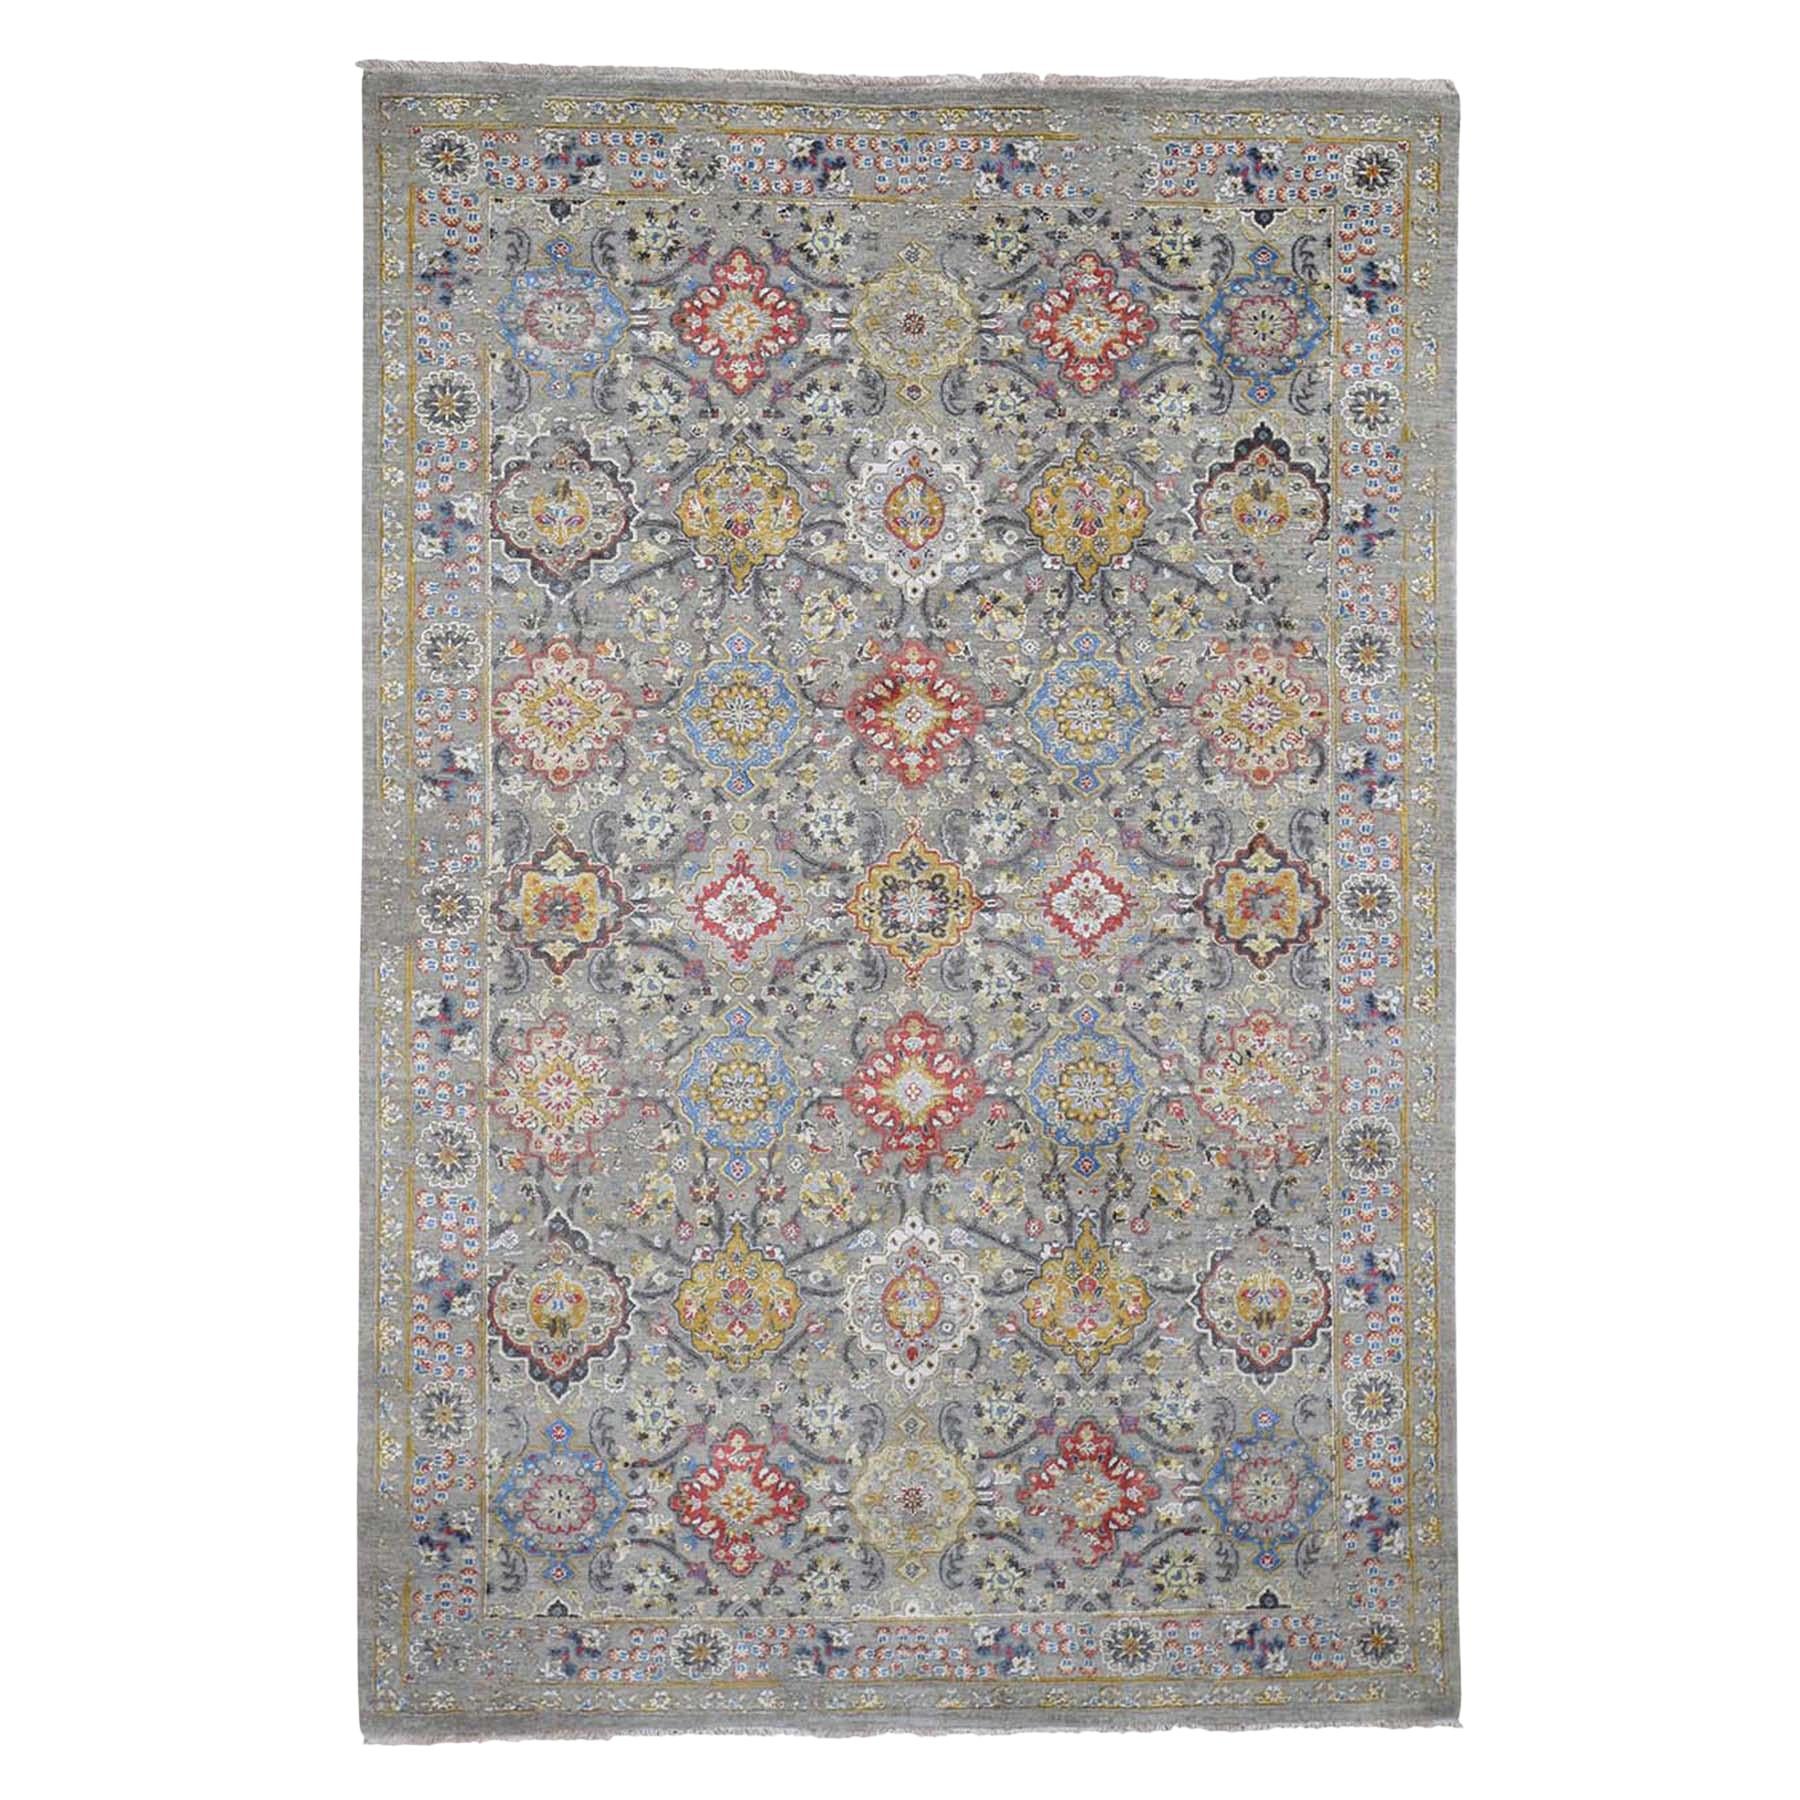 The Sunset Rosettes Pure Silk and Wool Hand Knotted Oriental Rug